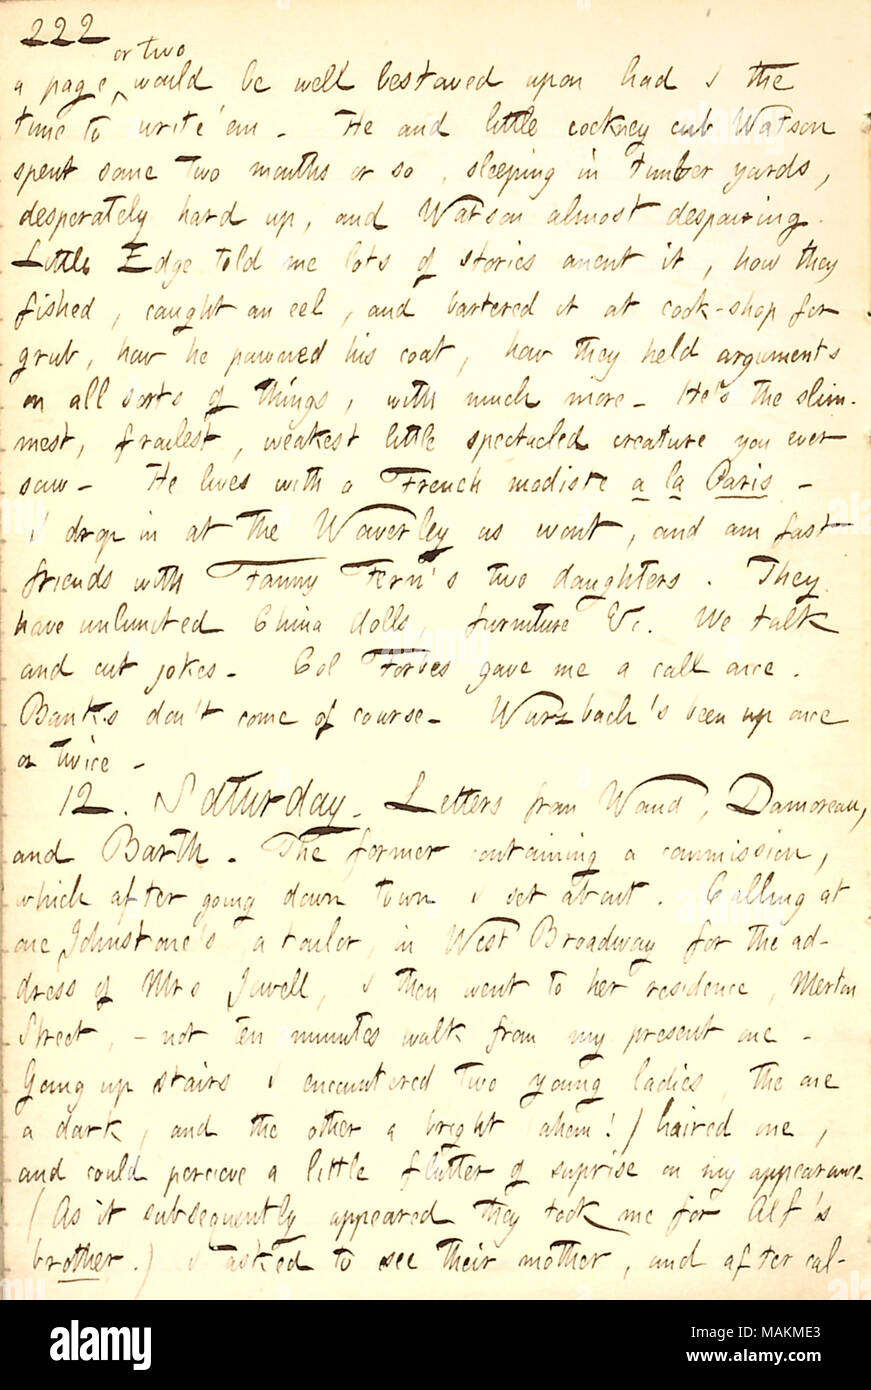 Describes a visit to the Jewell family on Merton Street at Alf Waud's request.  Transcription: a page or two would be well bestowed upon had I the time to write 'em. He [Frederick Edge] and little cockney cub [Frederick] Watson spent some two months or so, sleeping in timber yards, desperately hard up, and Watson almost despairing. Little Edge told me lots of stories anent it, how they fished, caught an eel, and bartered it at cook-shop for grub, how he pawned his coat, how they held arguments on all sorts of things, with much more. He's the slimmest, frailest, weakest little spectacled creatu Stock Photo